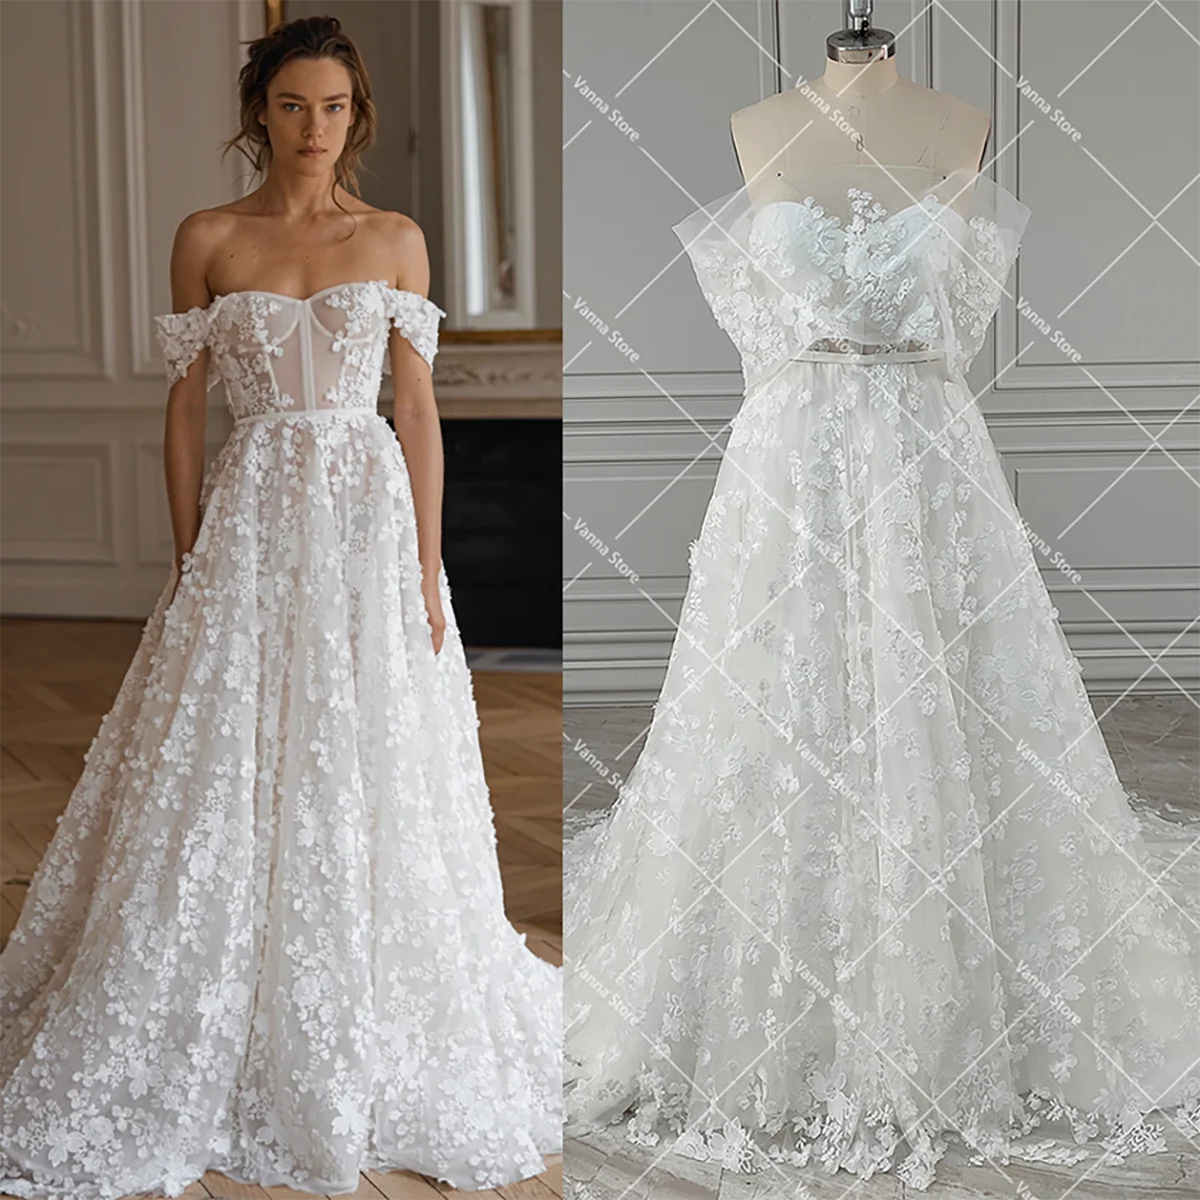 Bridal dress with Flutter sleeve cover up - Darius Cordell